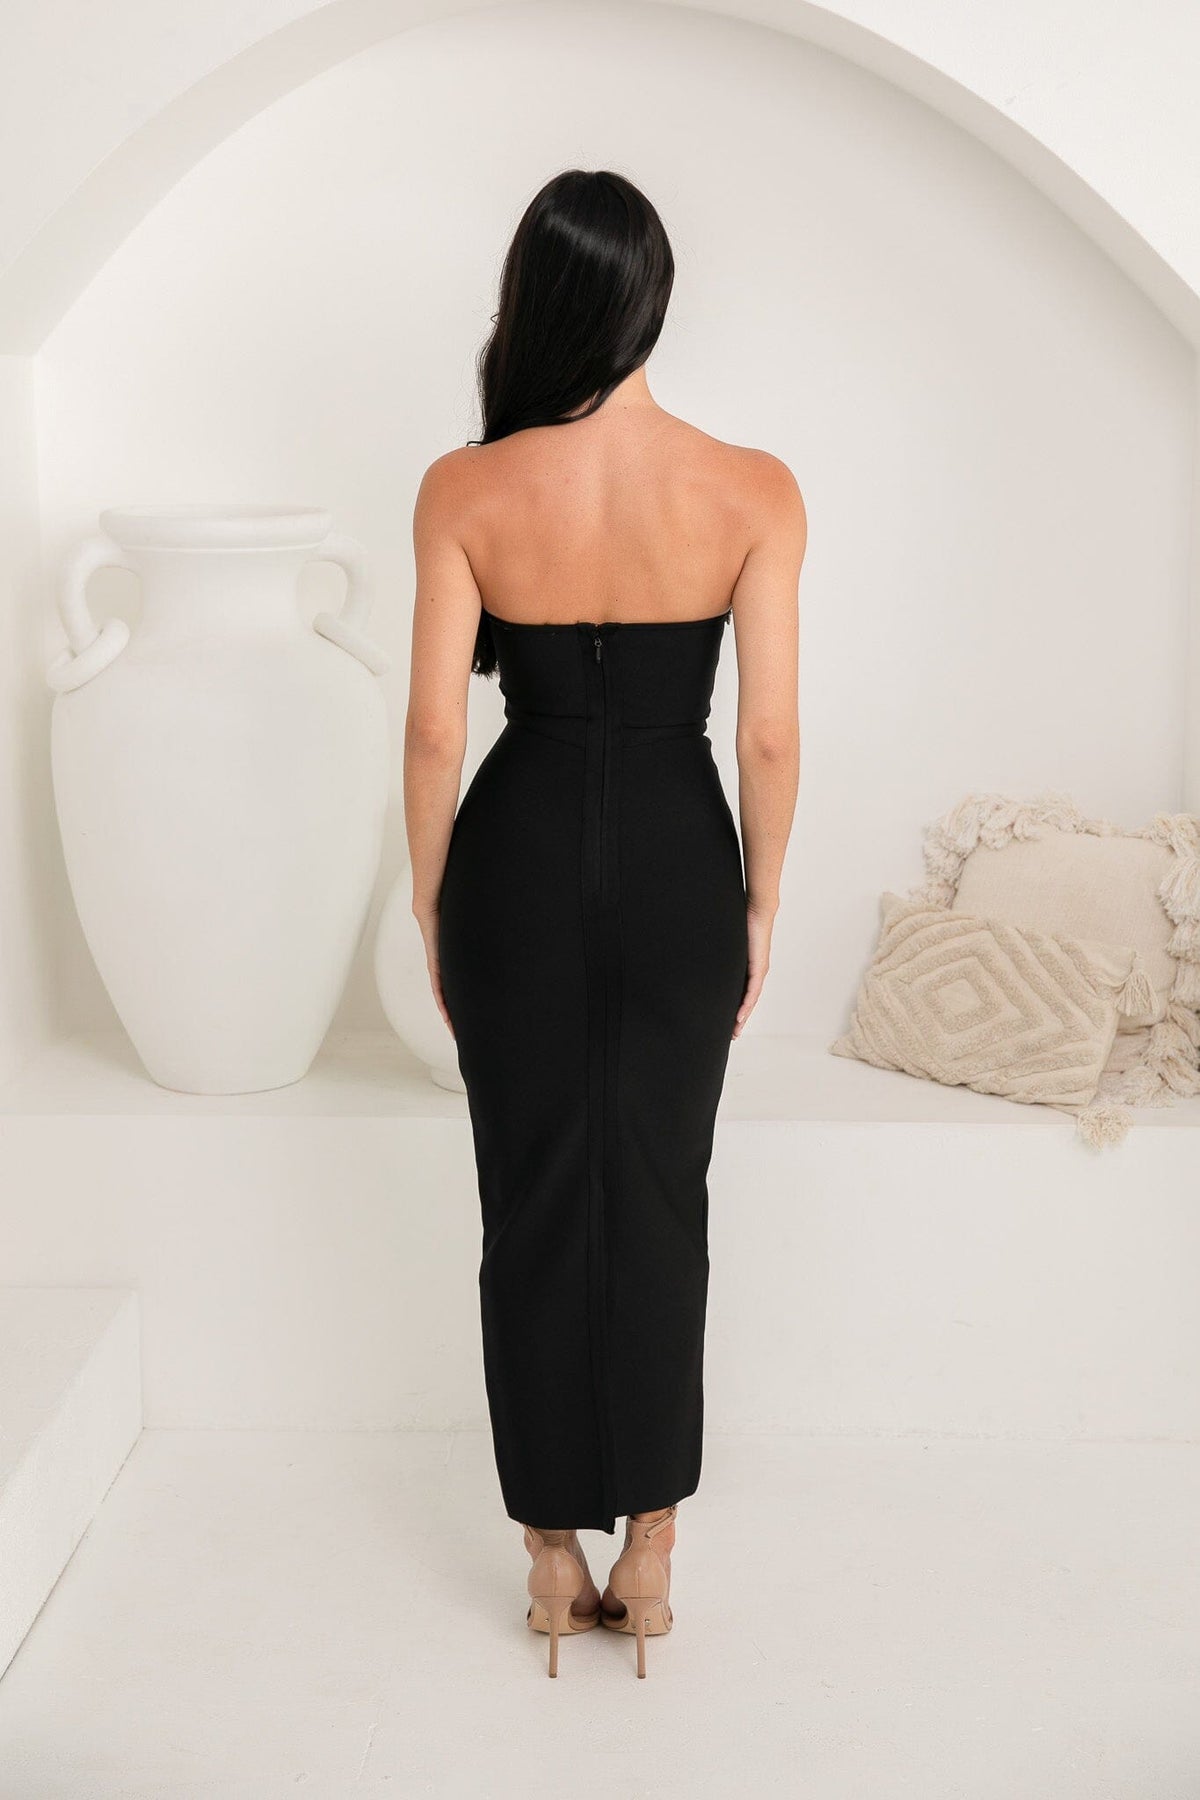 Back Image showcasing open shoulders of Black Strapless Bandage Maxi Dress with Clear Stones Embellished around the strapless sweetheart neckline